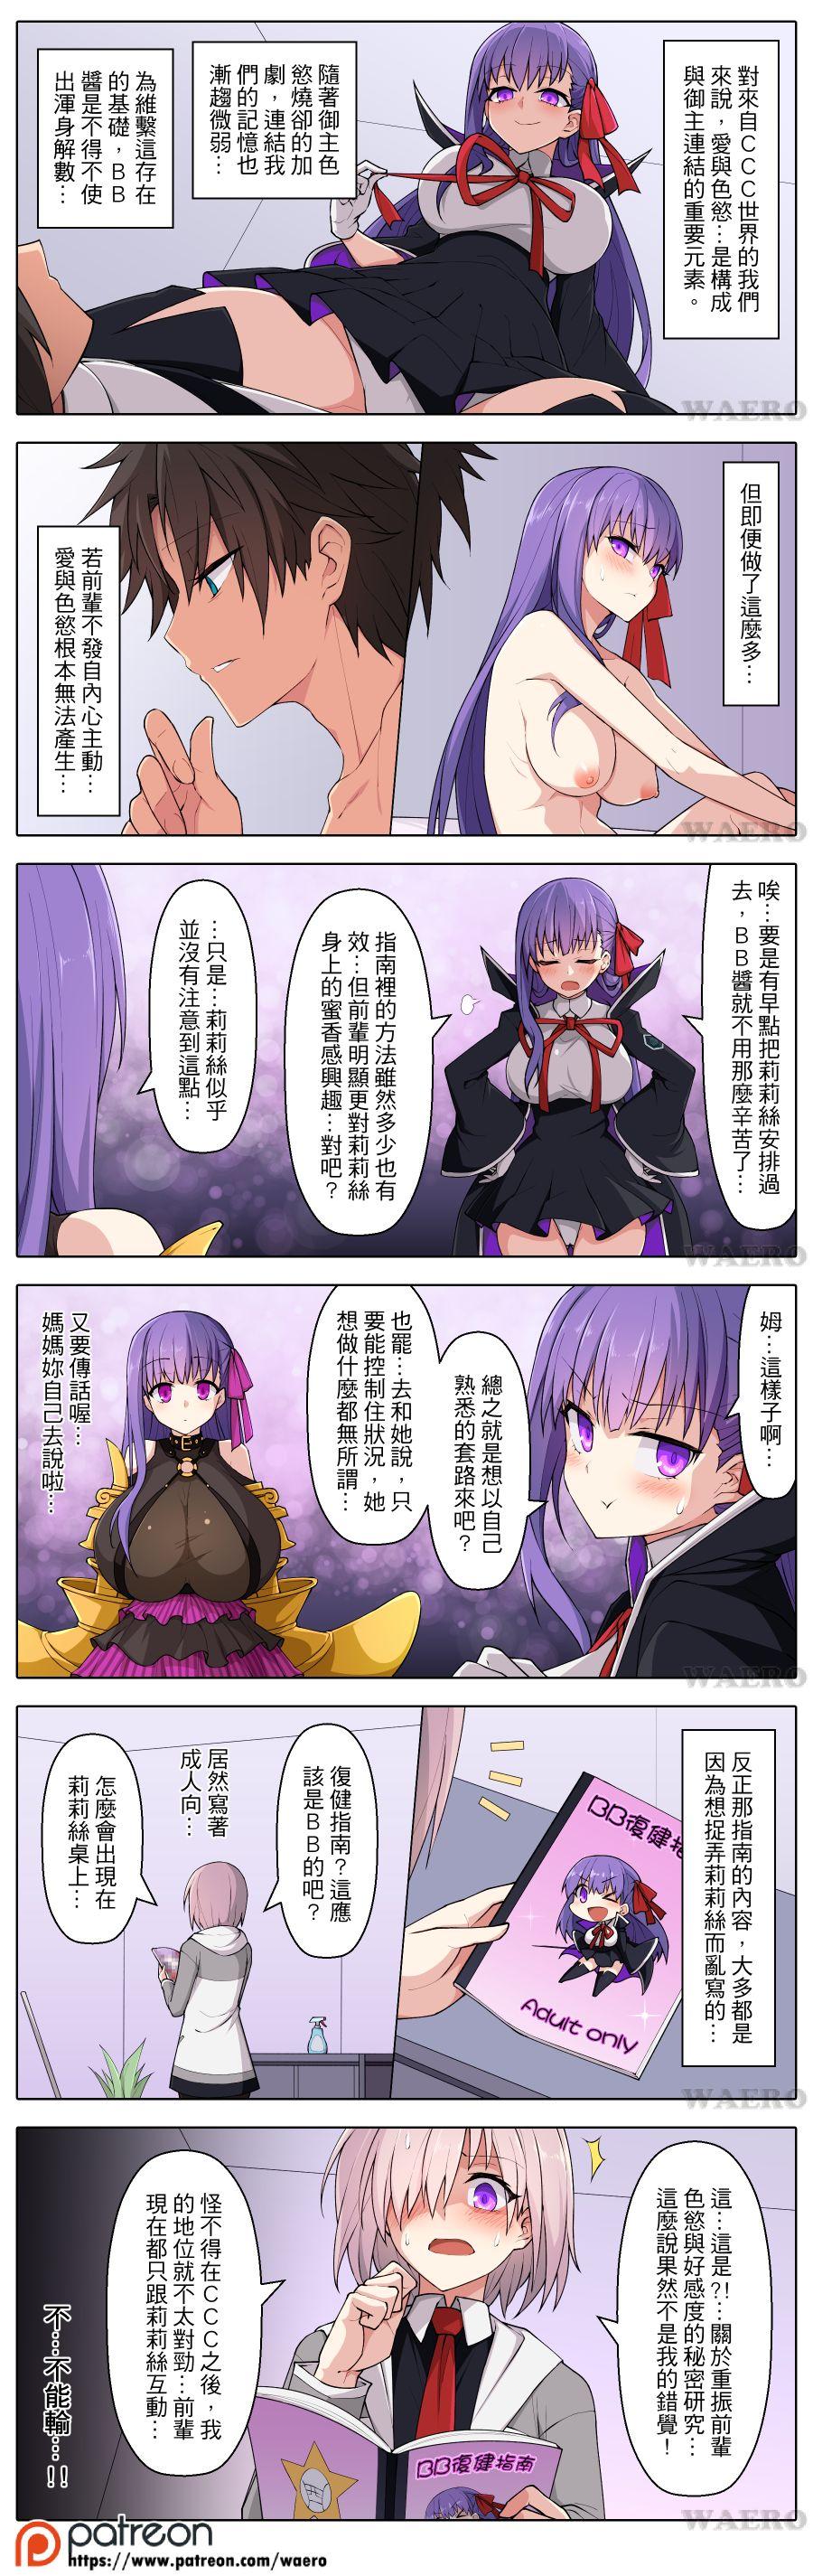 Street Lust Grand Order - Fate grand order Strip - Page 4